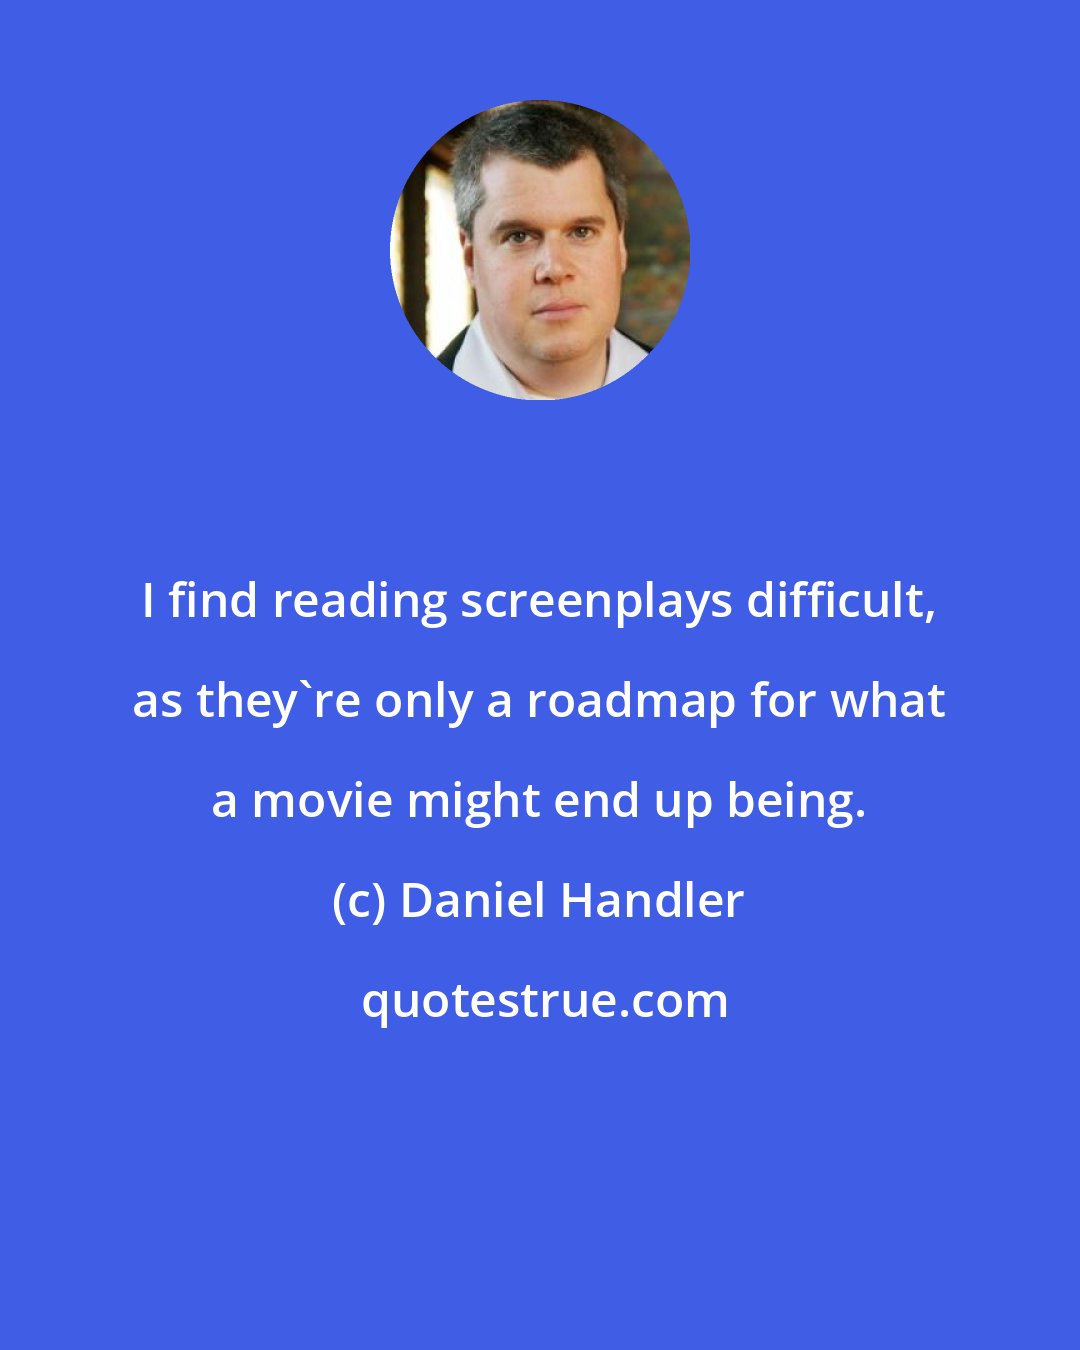 Daniel Handler: I find reading screenplays difficult, as they're only a roadmap for what a movie might end up being.